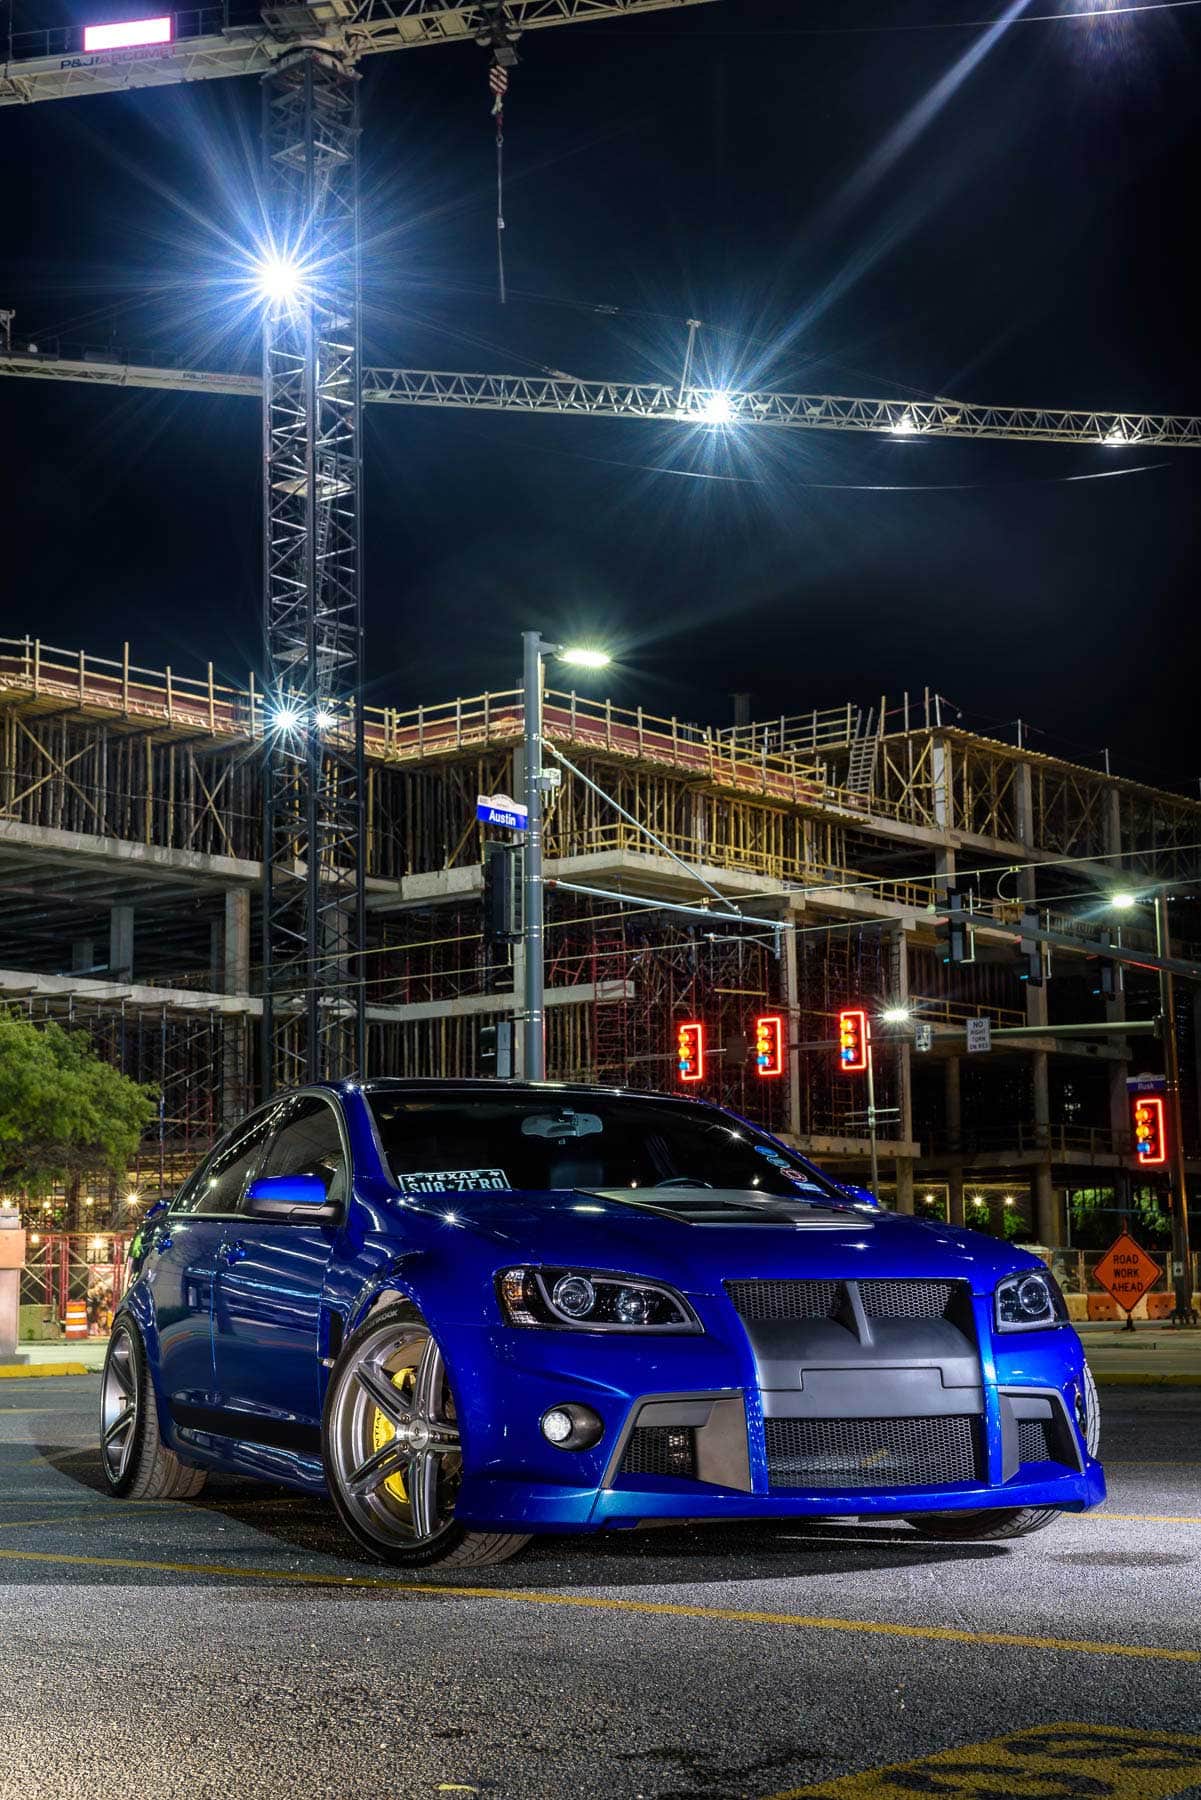 A blue car parked in front of a construction site.